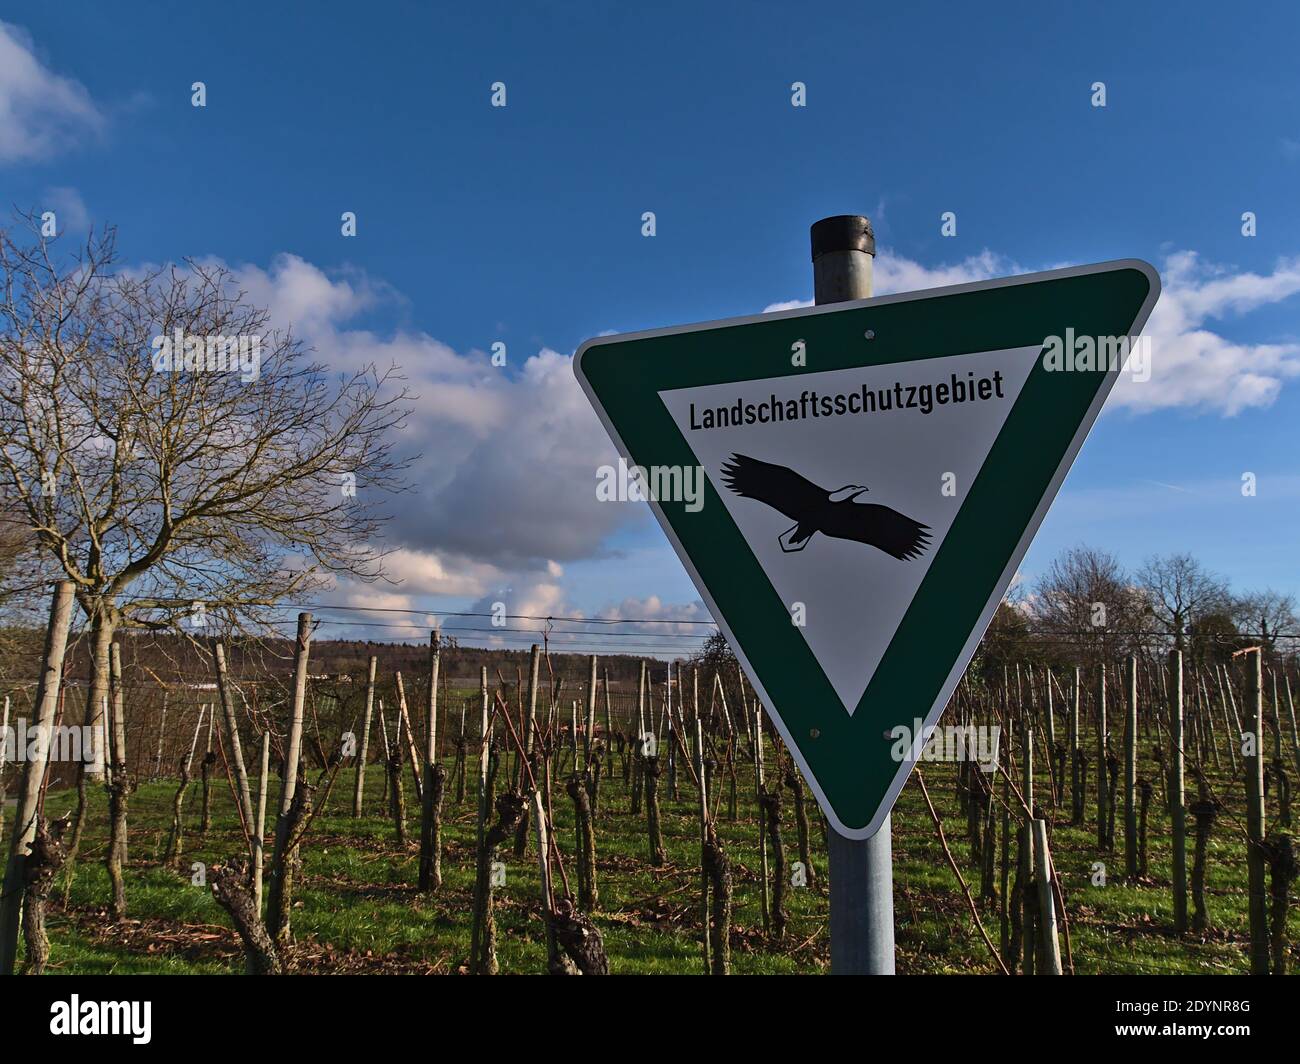 Green and white colored metal sign in triangular shape with black painted bird of prey informing hikers that they enter a landscape protected area. Stock Photo